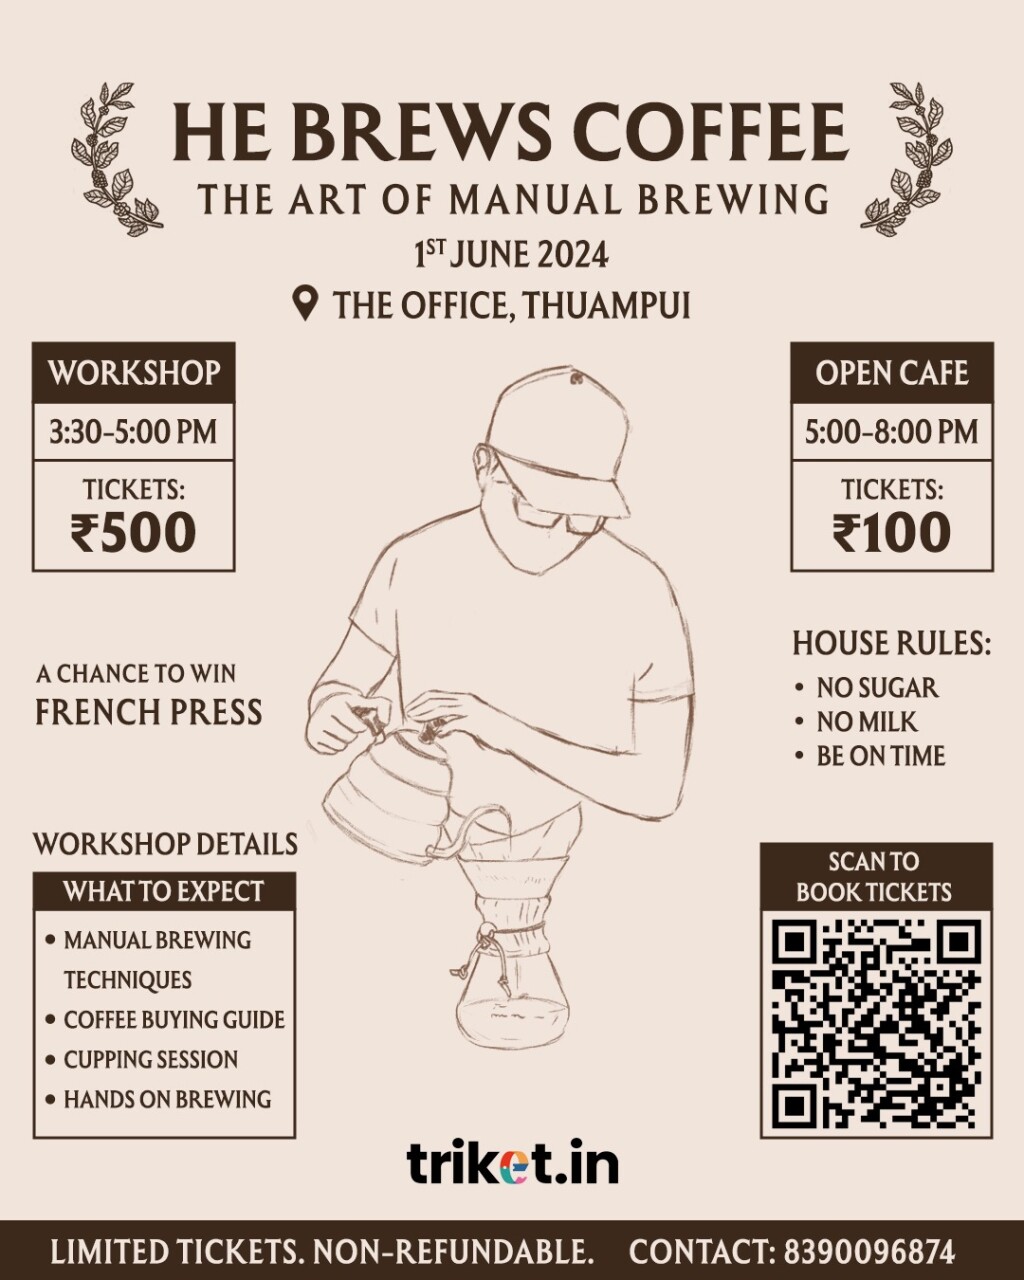 He Brews Coffee - The Art of Manual Brewing